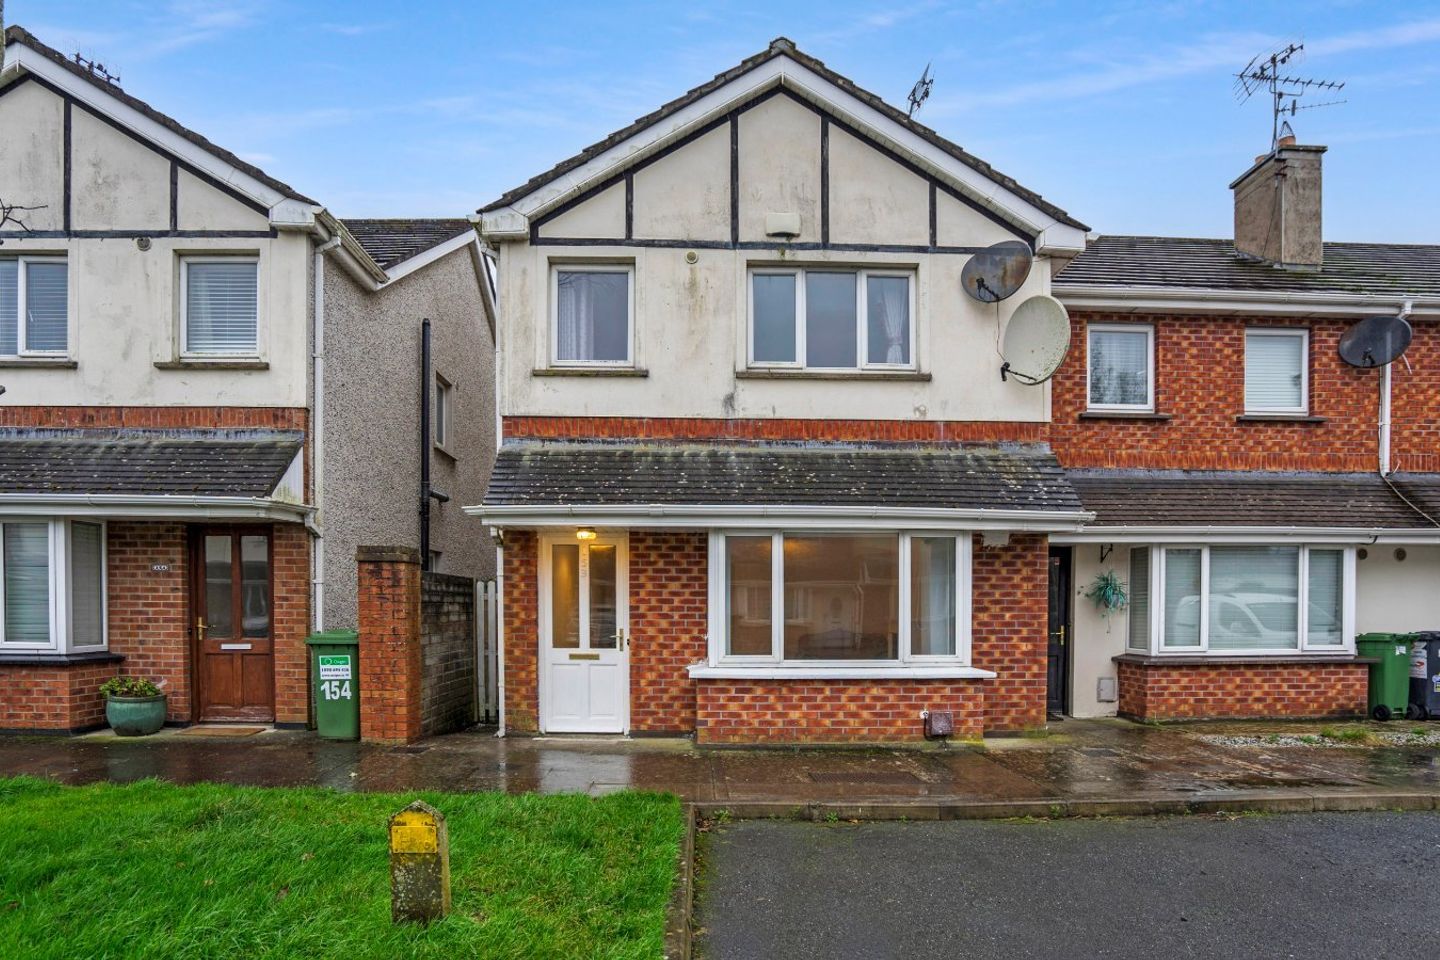 153 Riverside Drive, Red Barns Road, Dundalk, Co. Louth, A91X25P